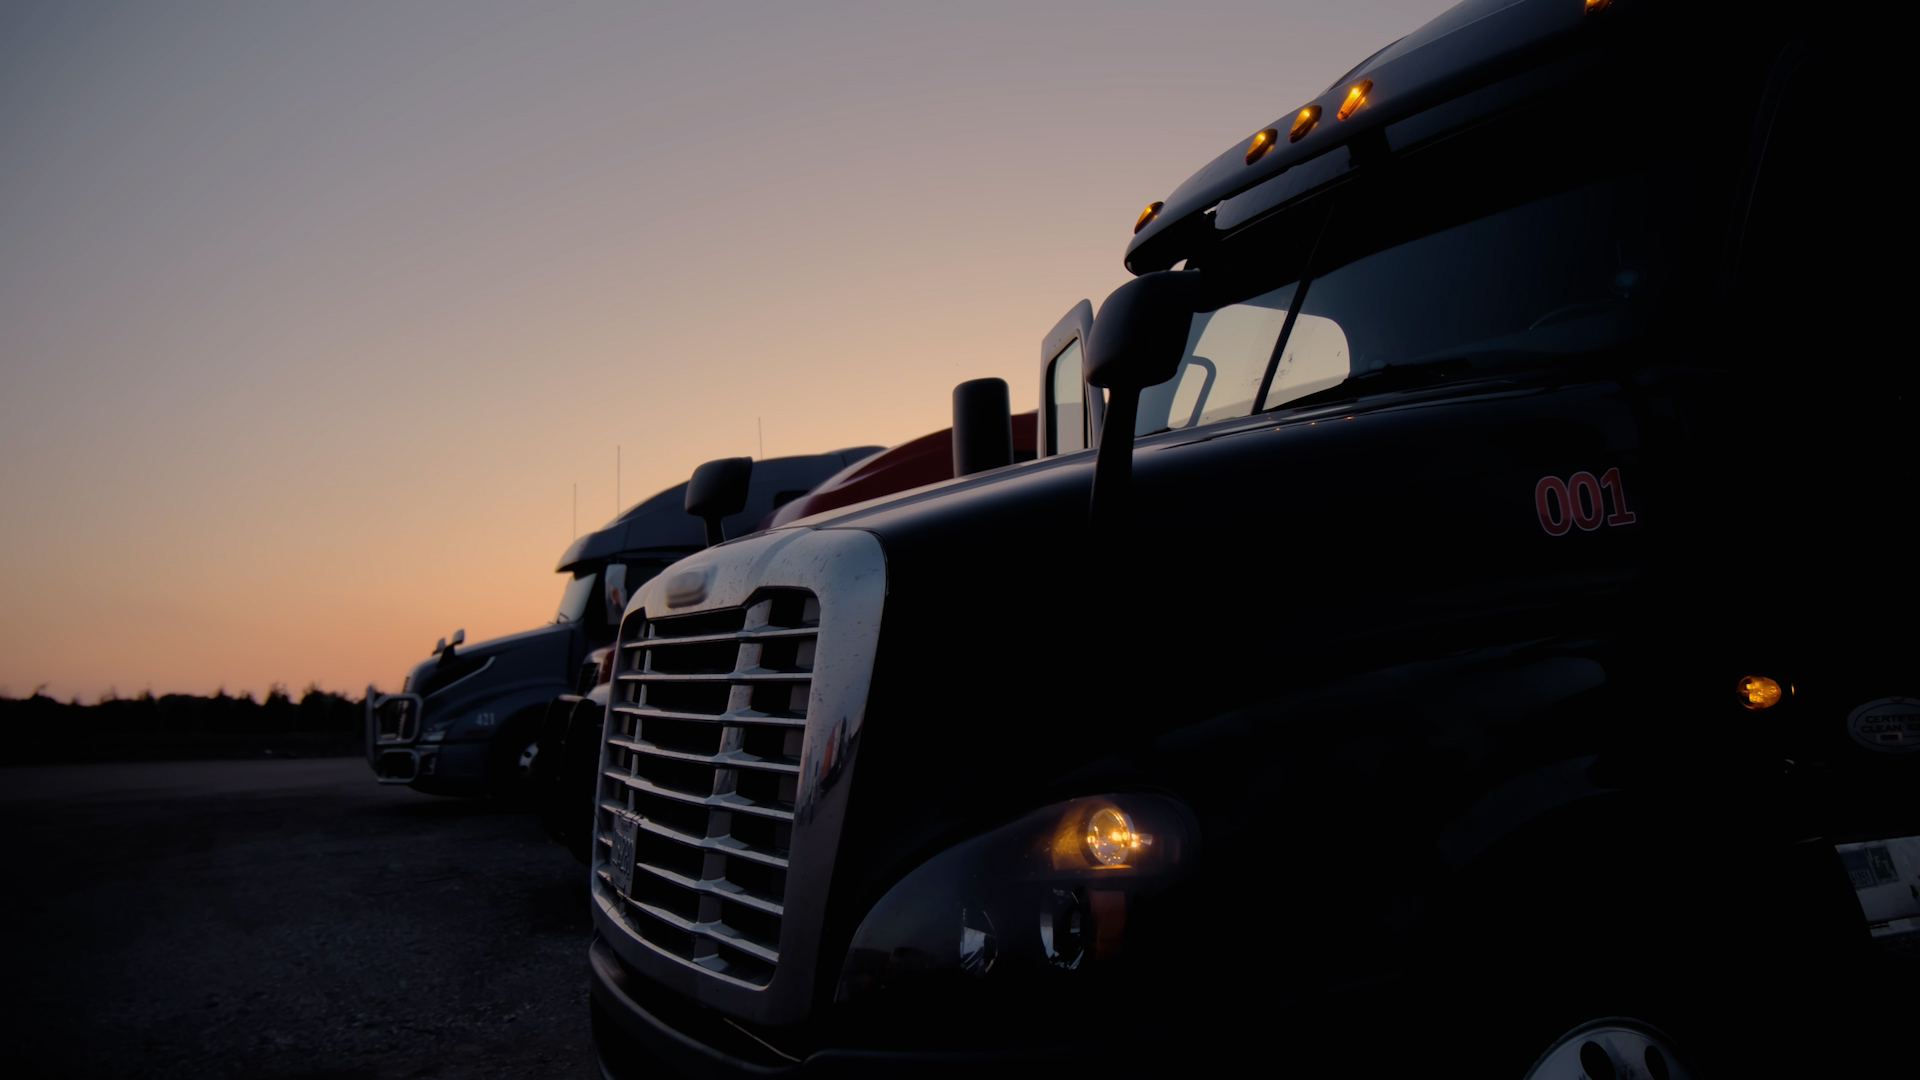 Several semi-trucks parked in the view of a sunset